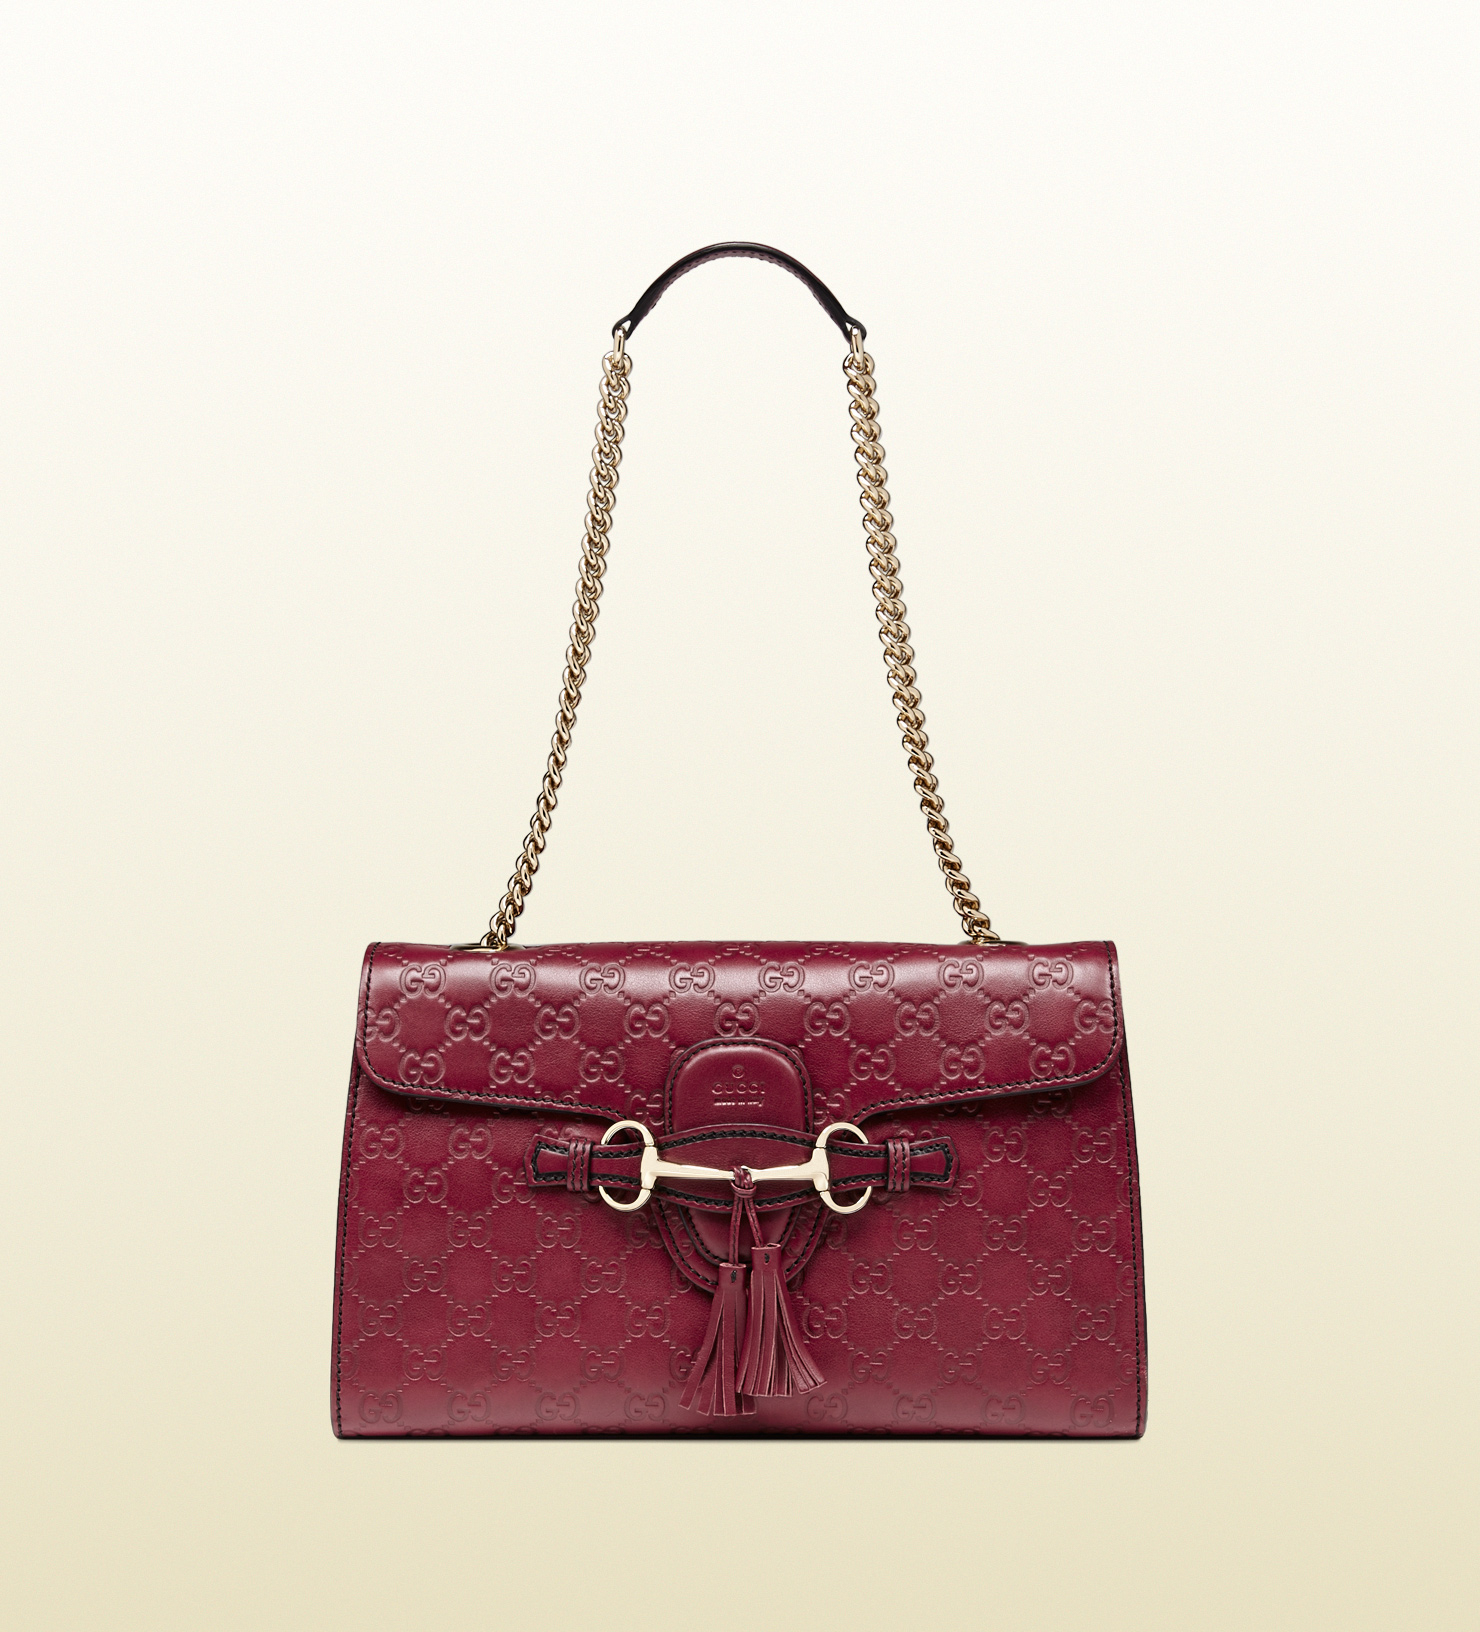 Gucci Emily Chain Ssima Leather Shoulder Bag in Red (ruby) | Lyst